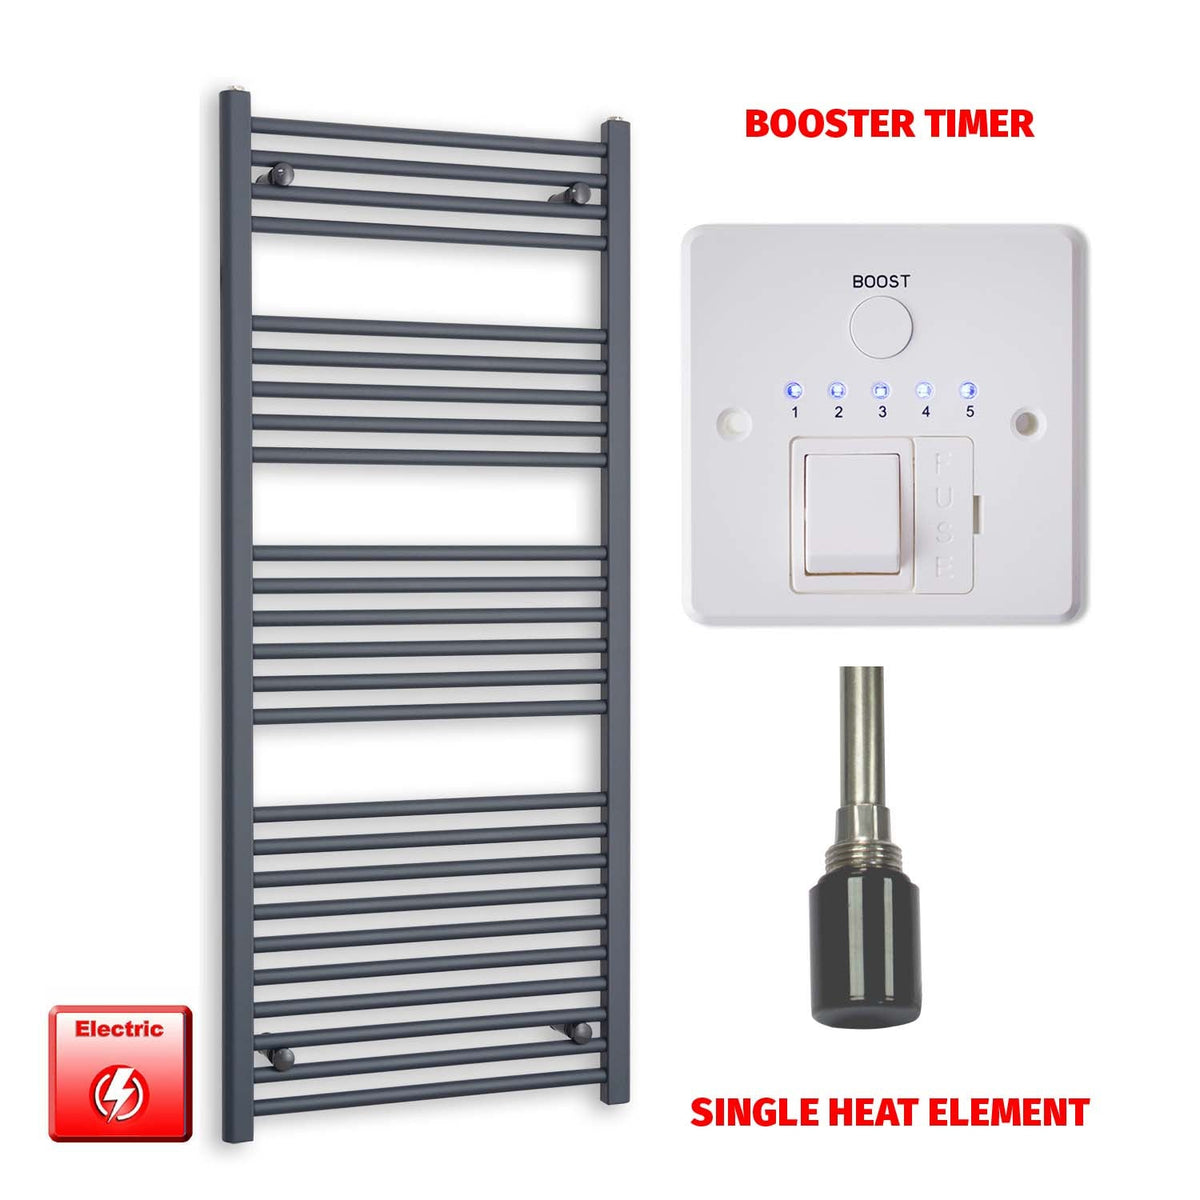 1400 x 600 Flat Anthracite Pre-Filled Electric Heated Towel Radiator HTR  Single heat element Booster timer